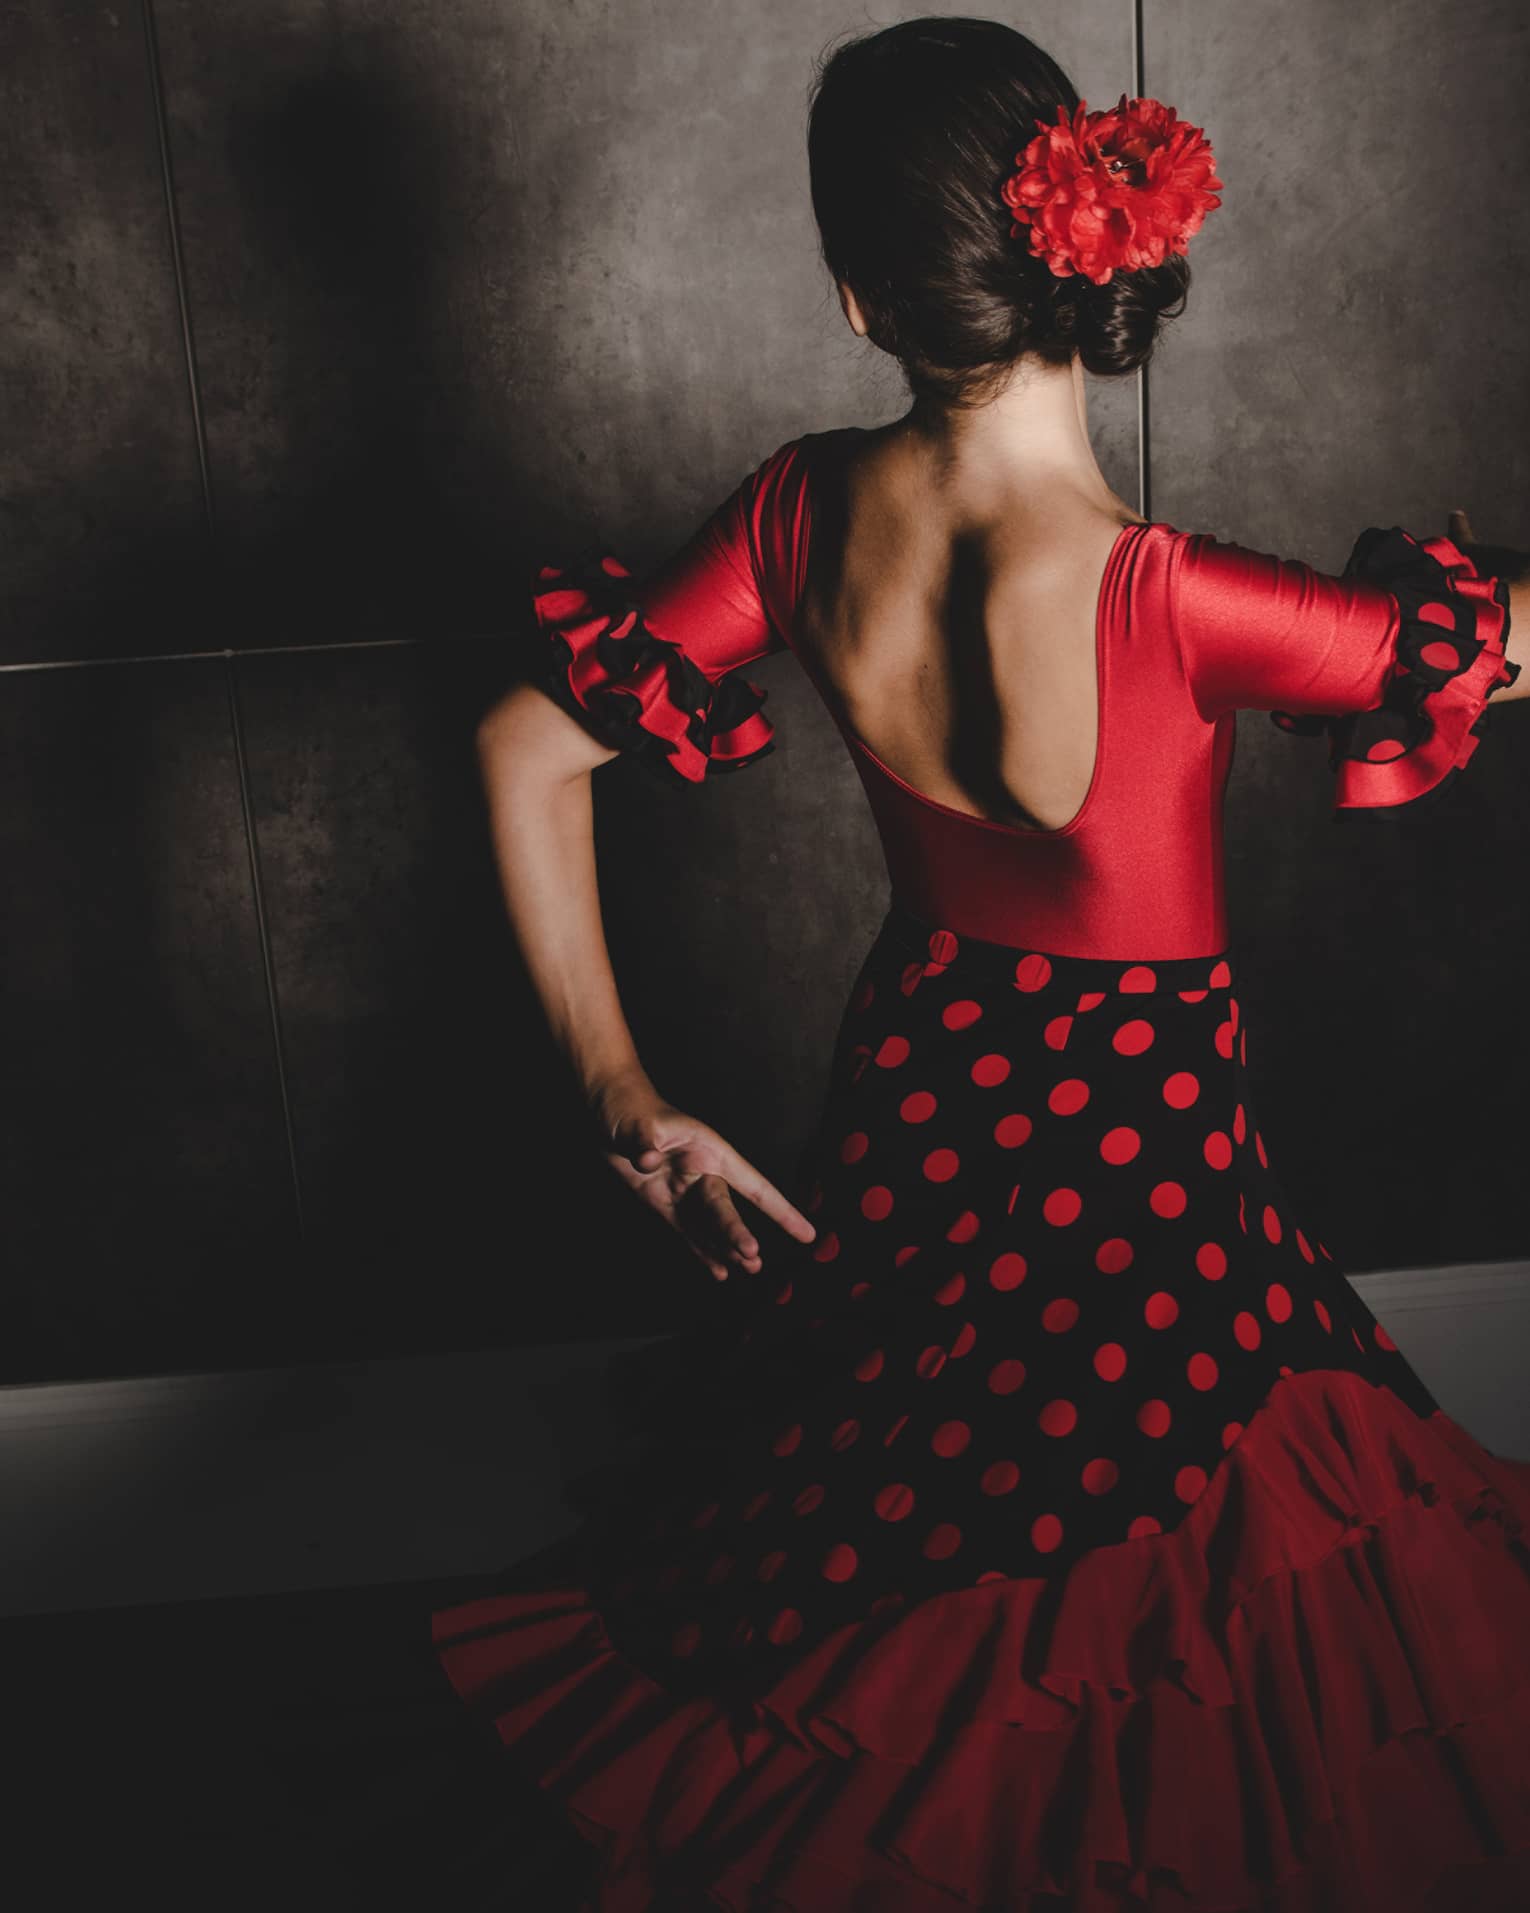 A woman wearing a black and white salsa dancing dress and red flower in her hair dances with her face turned away from the camera 